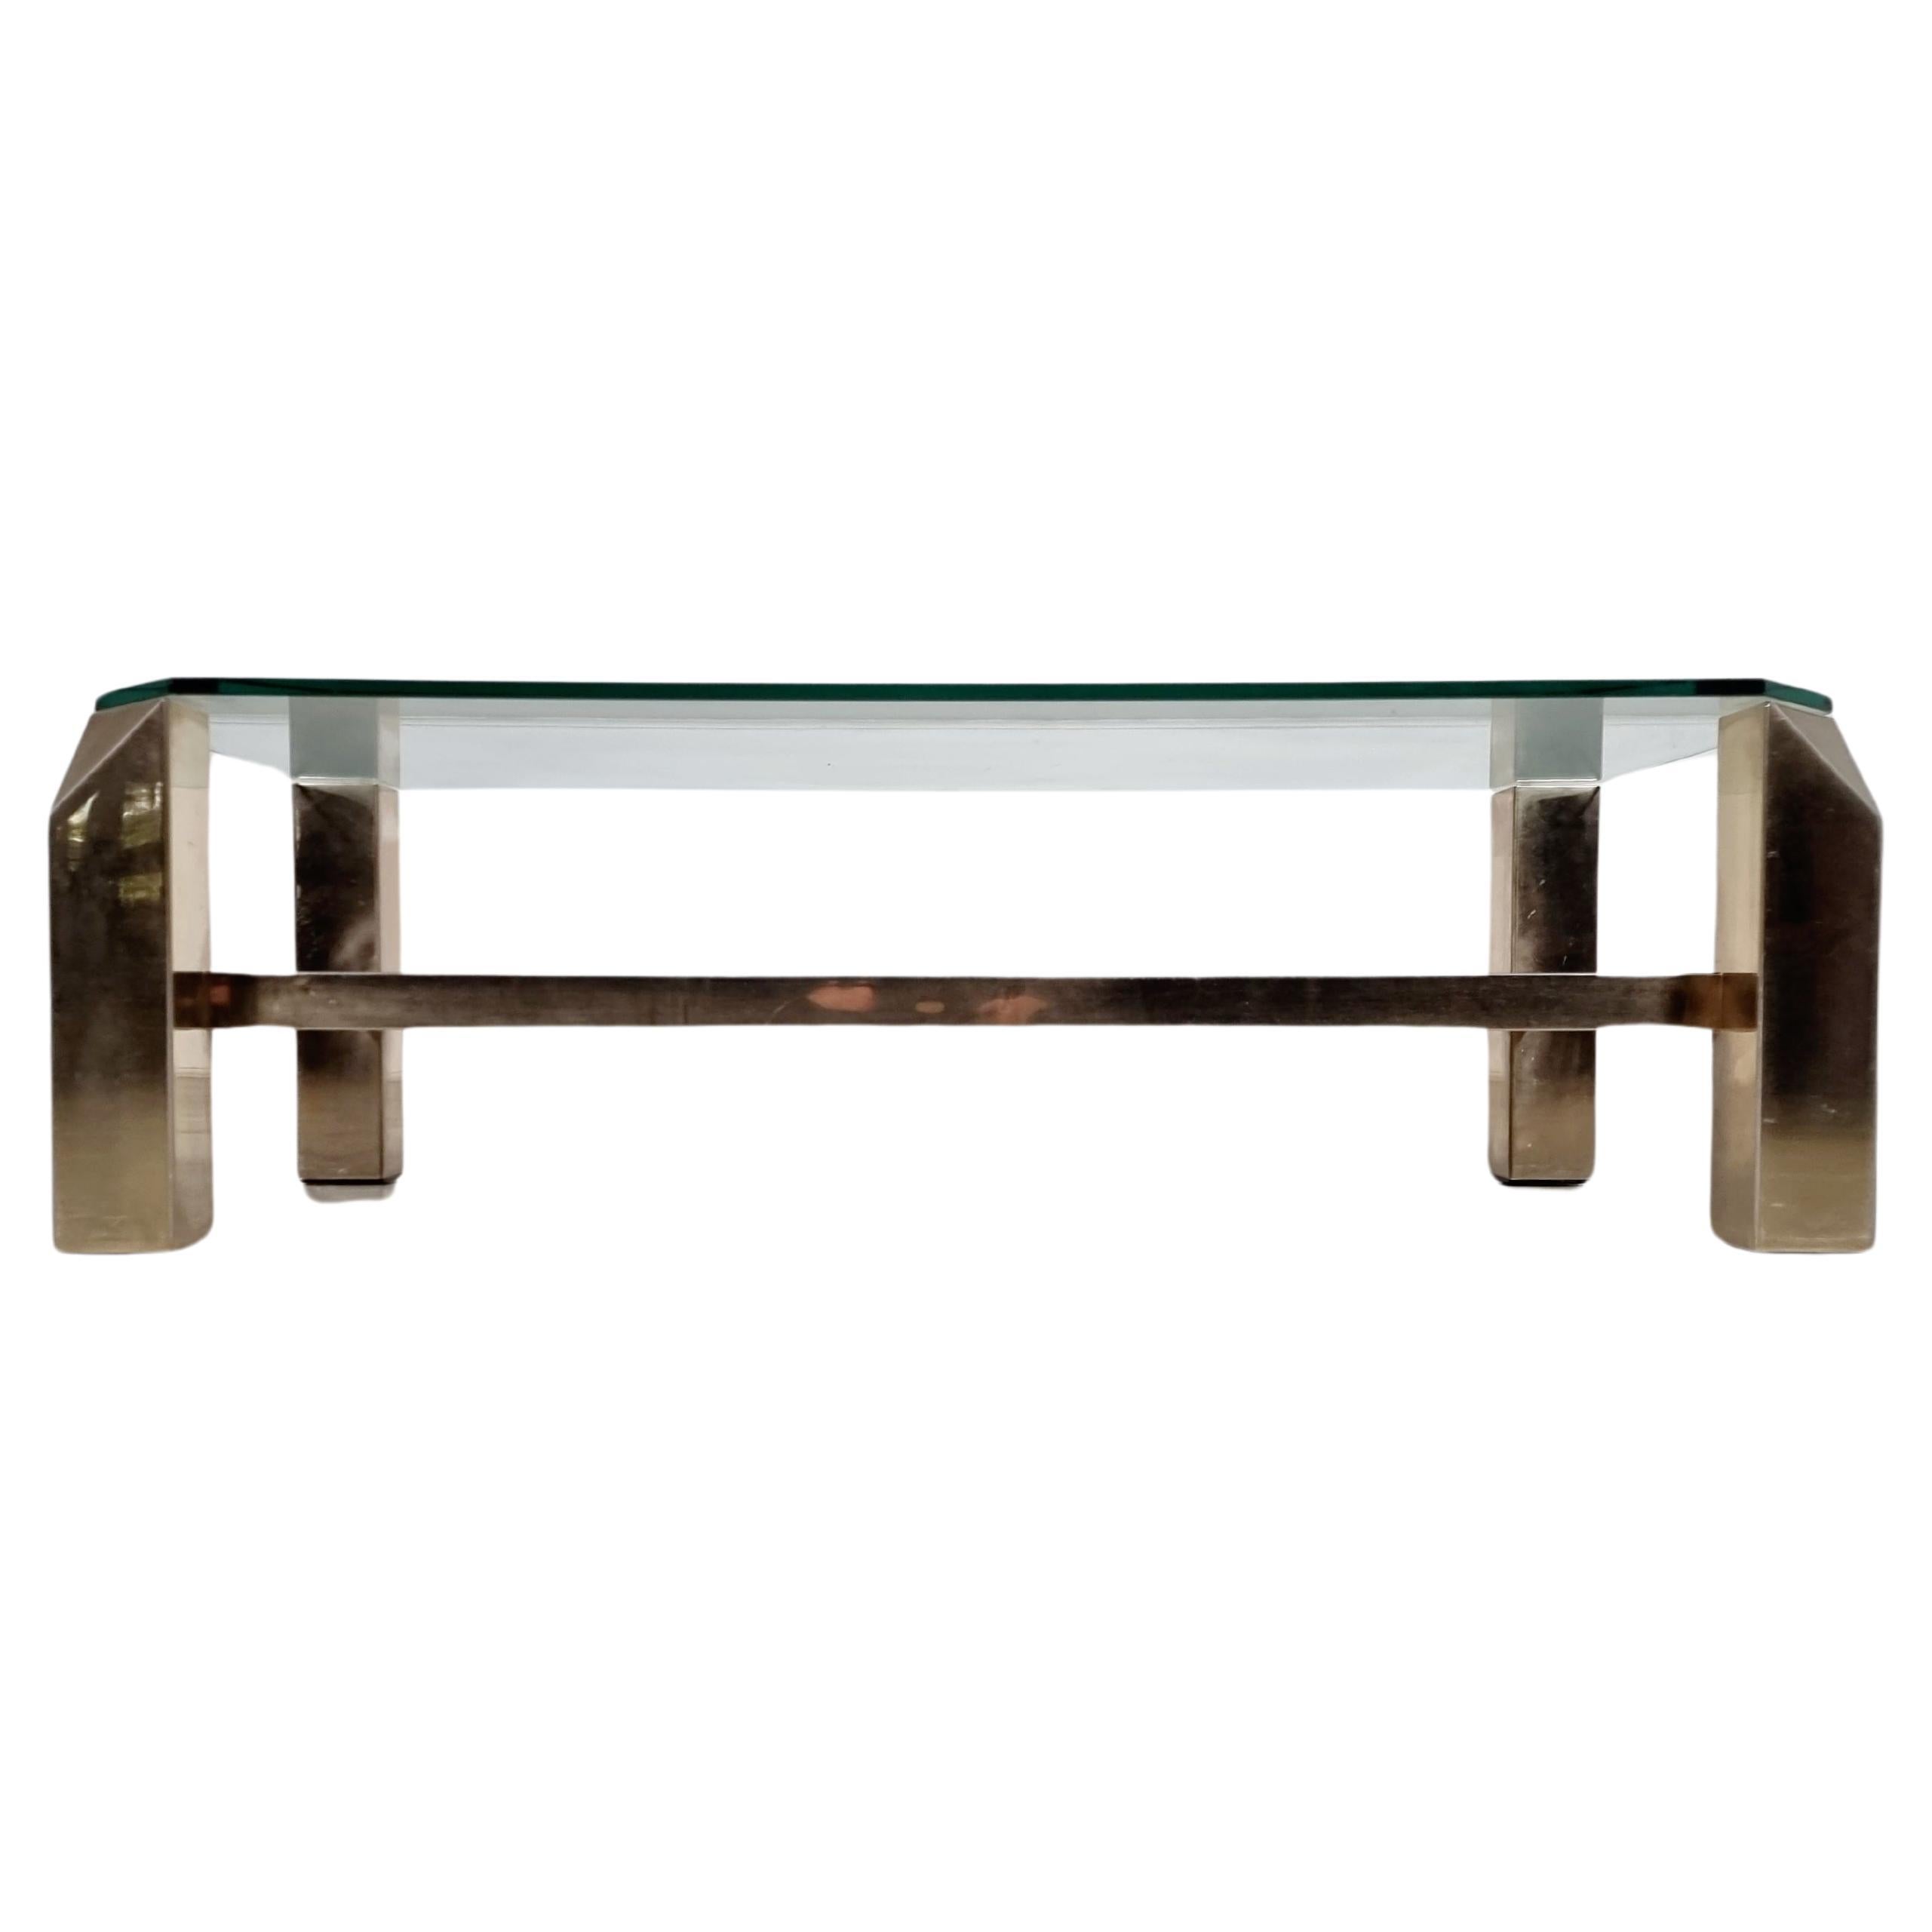 23-karat gold plated coffee table in eye-catching geometric style, manufactured by Belgo Chrom in Belgium around 1970.

It is made of high-quality brass with gold plating. The finish to the rectangular shapes of the base is really nice, with